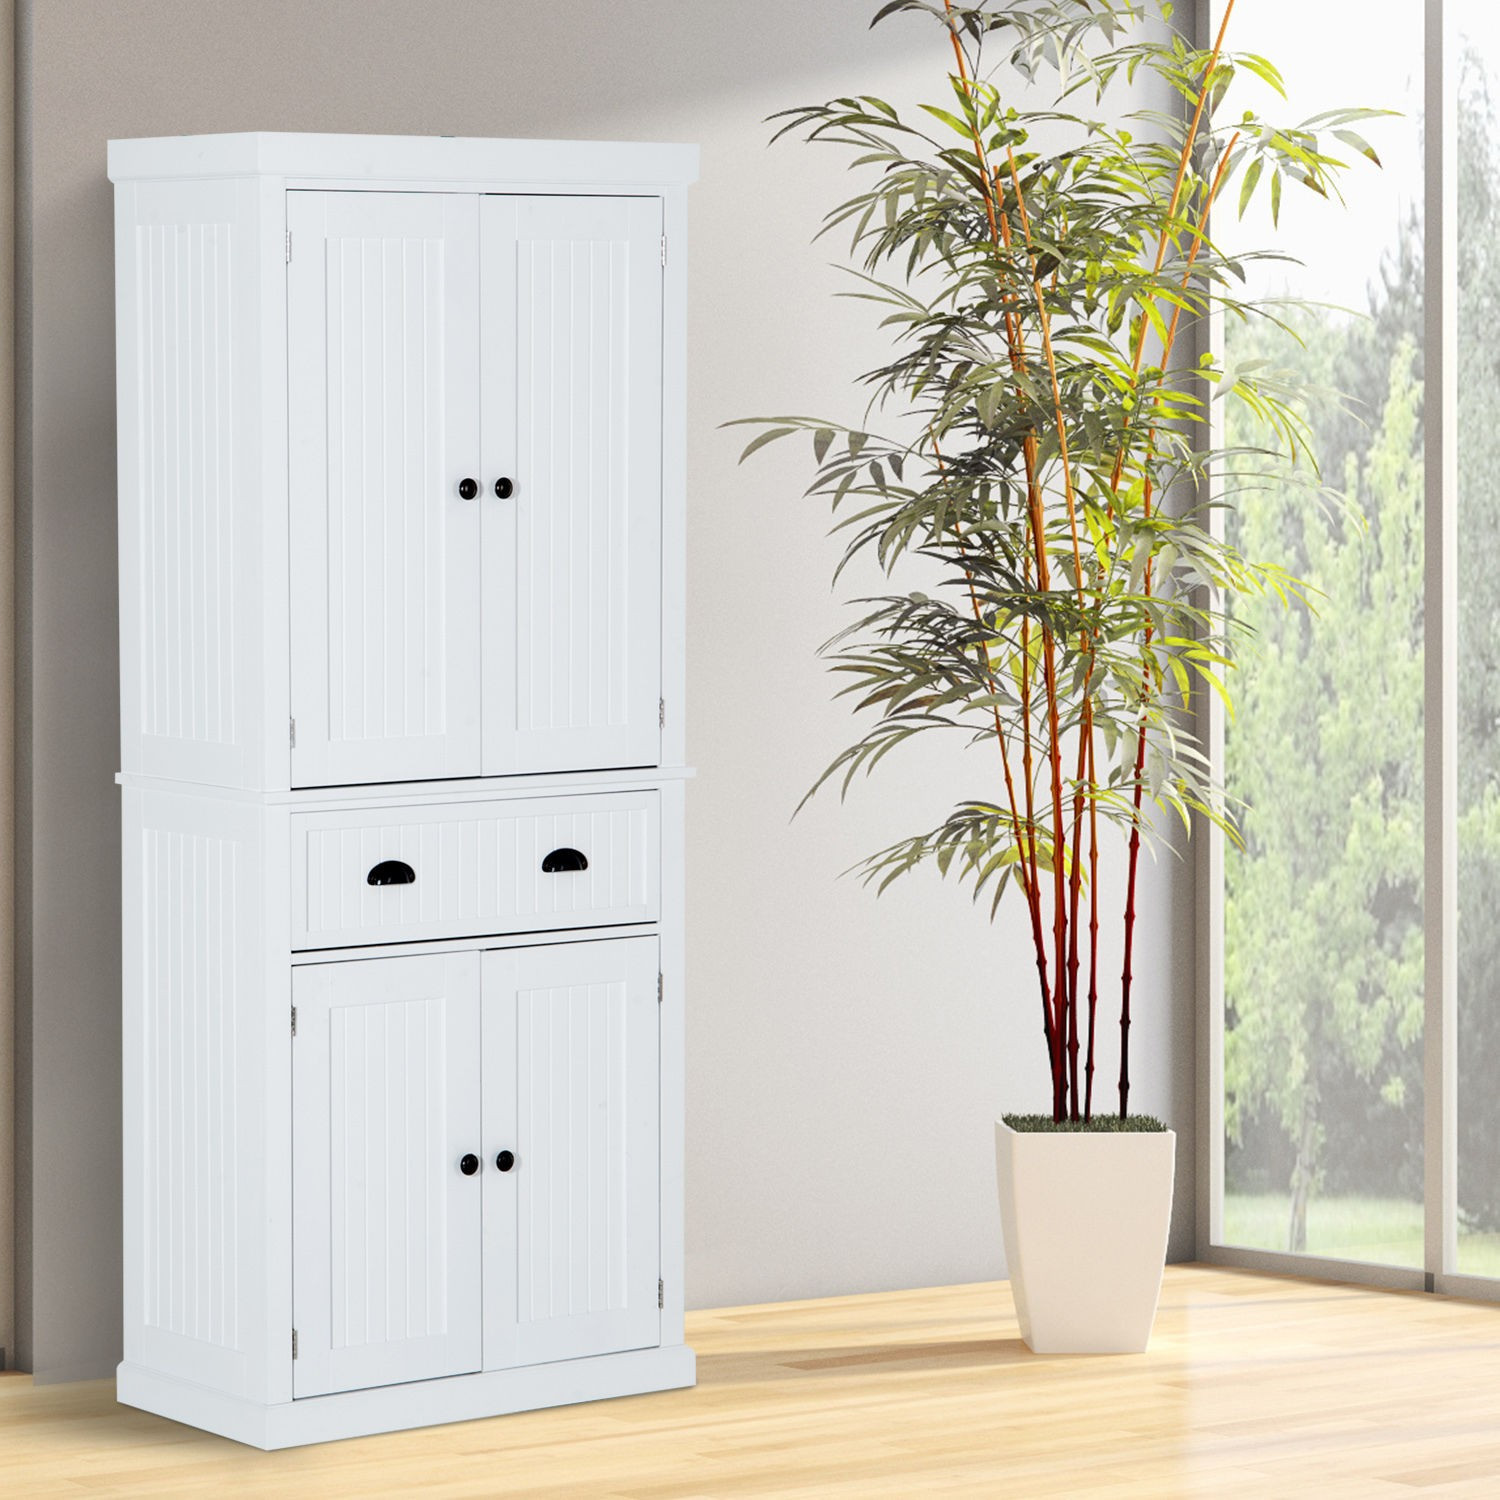 White Pantry Cabinets For Kitchen
 Hom Free Standing Colonial Wood Storage Cabinet